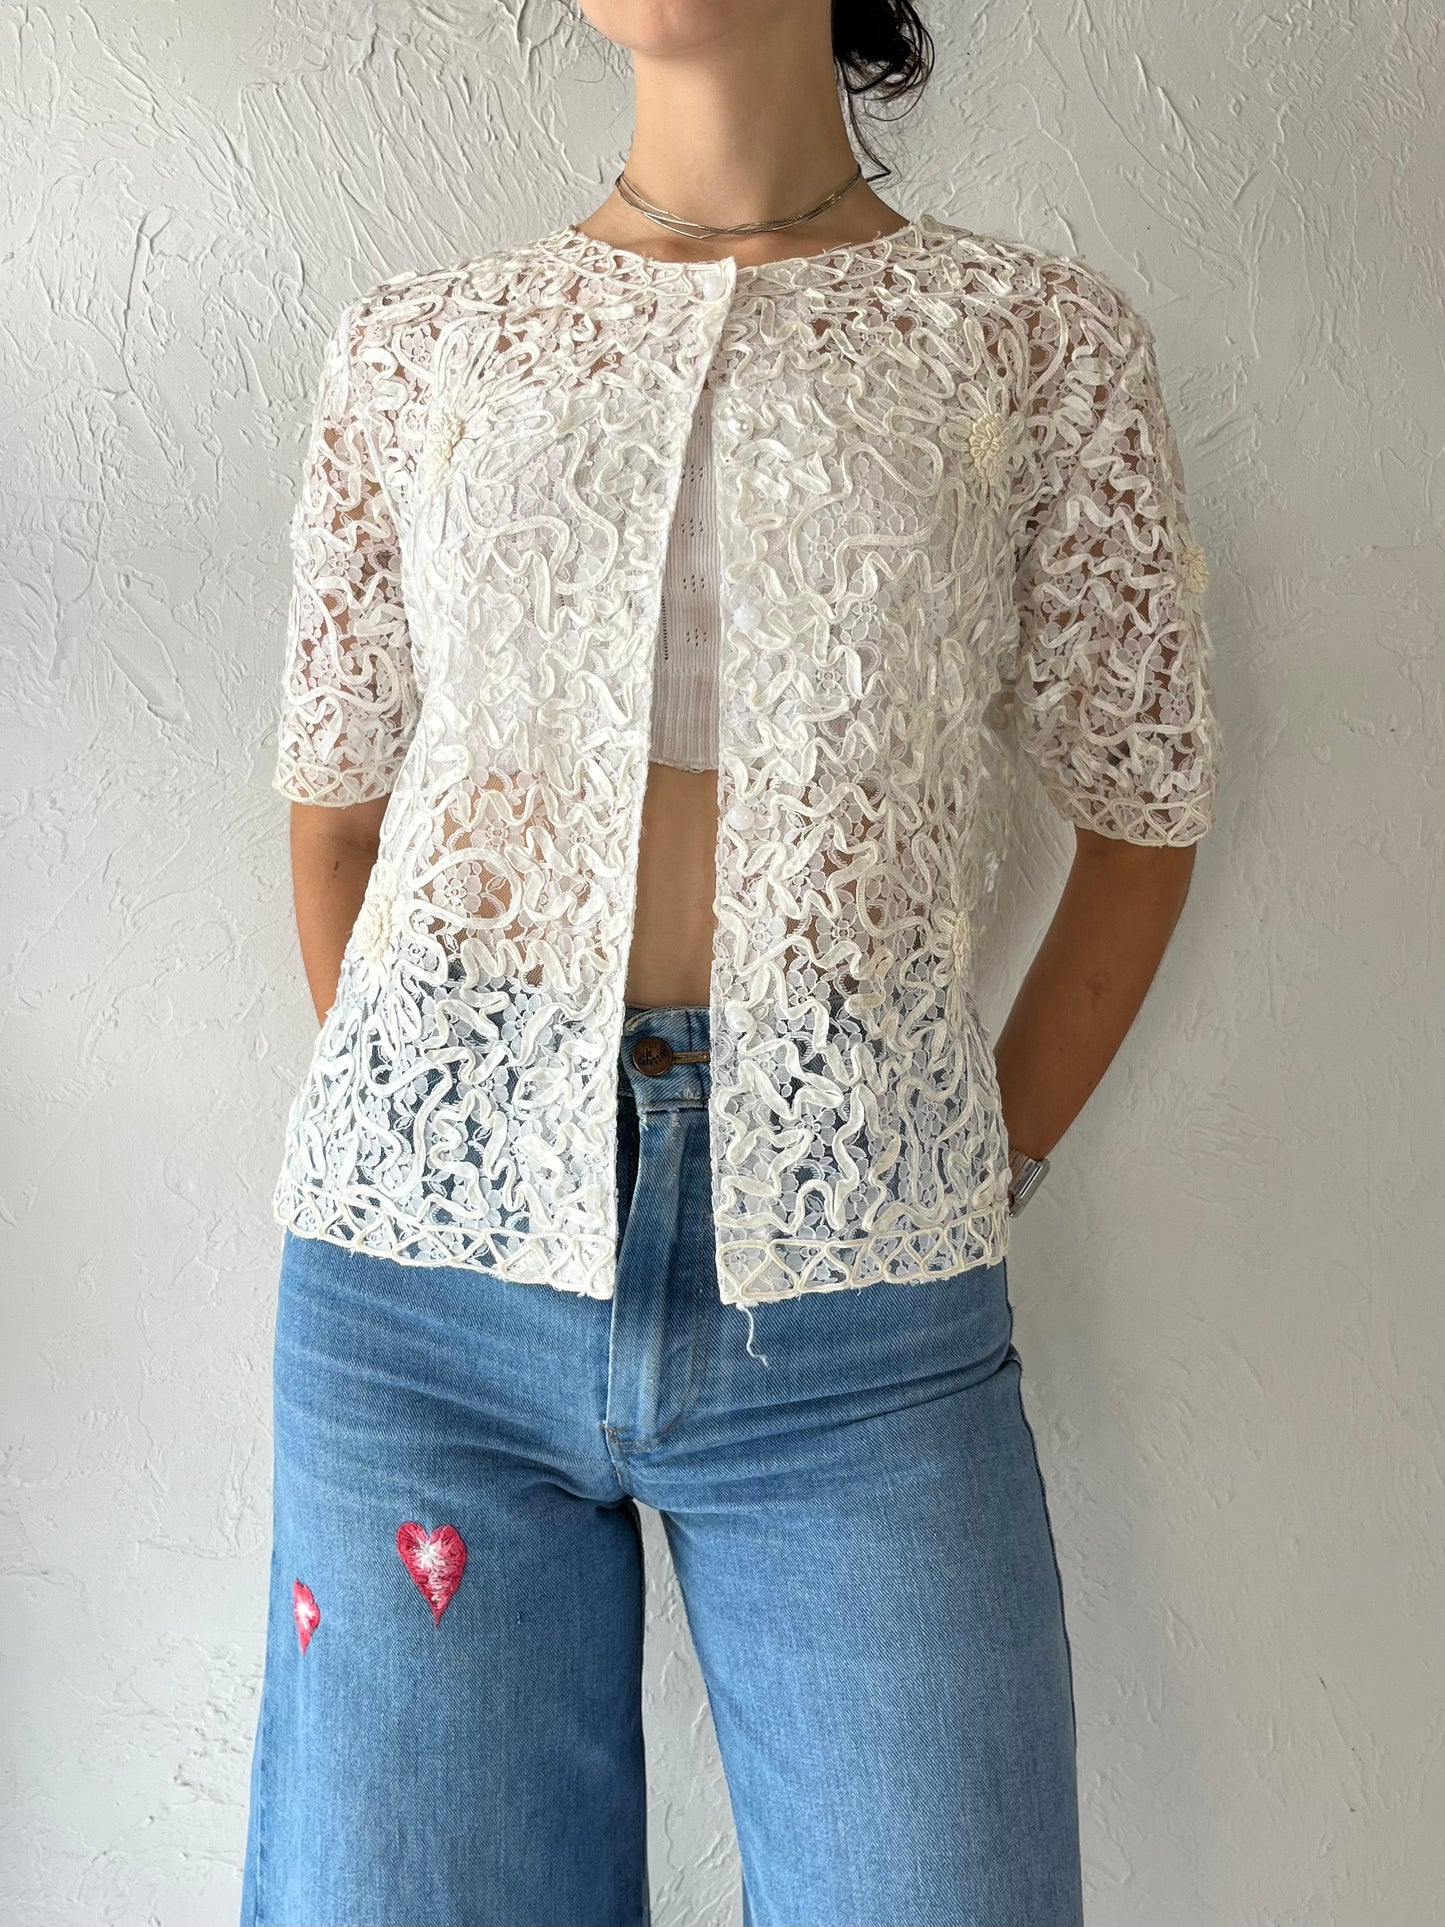 Y2K 'Yalenti' White Rayon Lace Short Sleeve Cardigan Top / Small